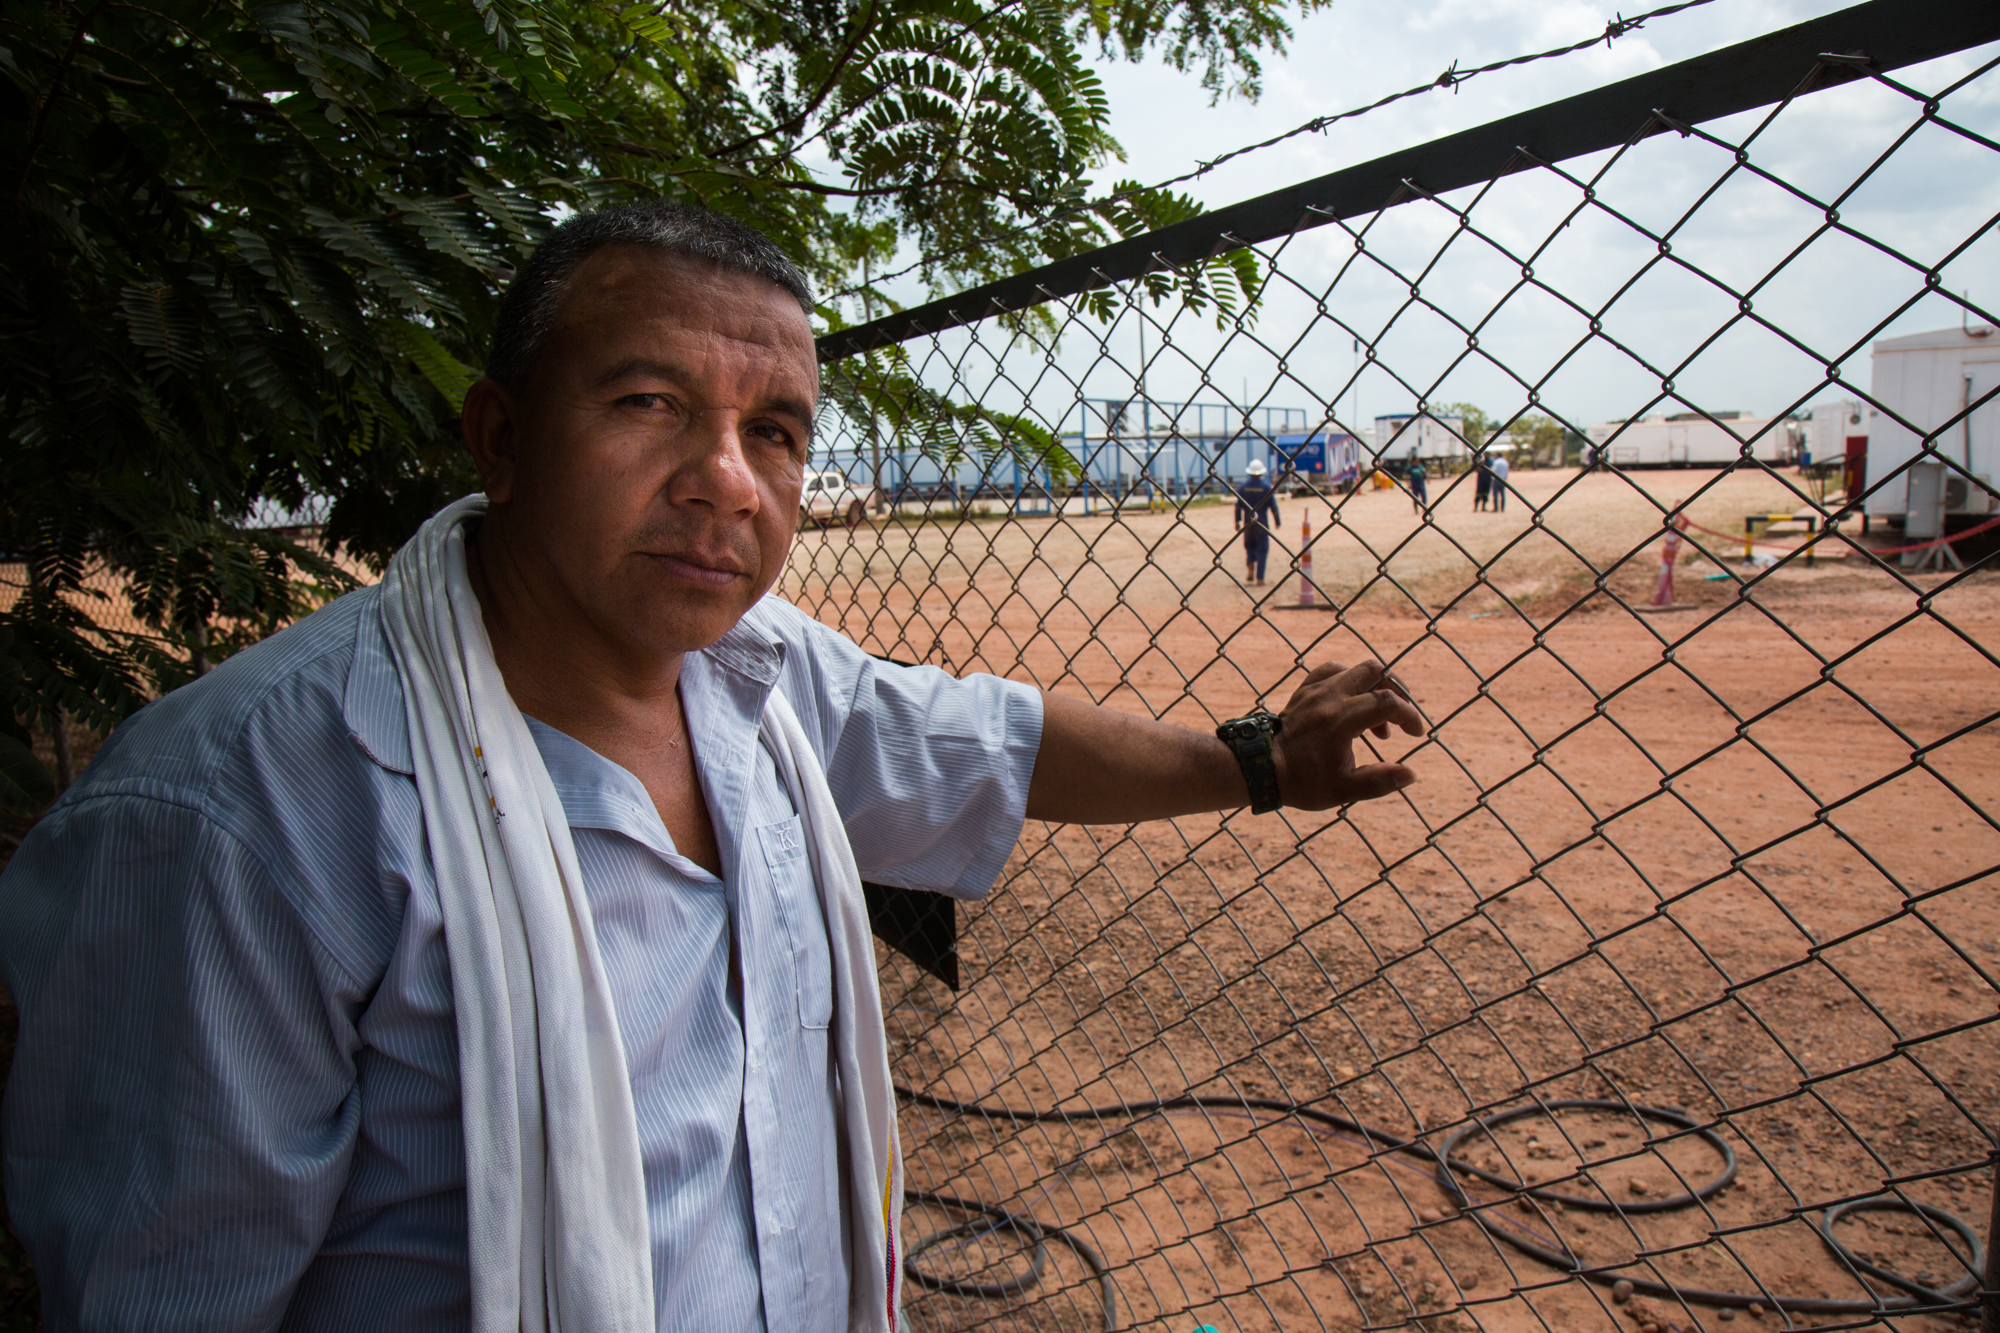  Héctor Sánchez stands along the fenceline of an Ecopetrol base in Rubiales, Meta where he is not allowed to enter.&nbsp;Rubiales, Meta, Colombia. April 9, 2017 